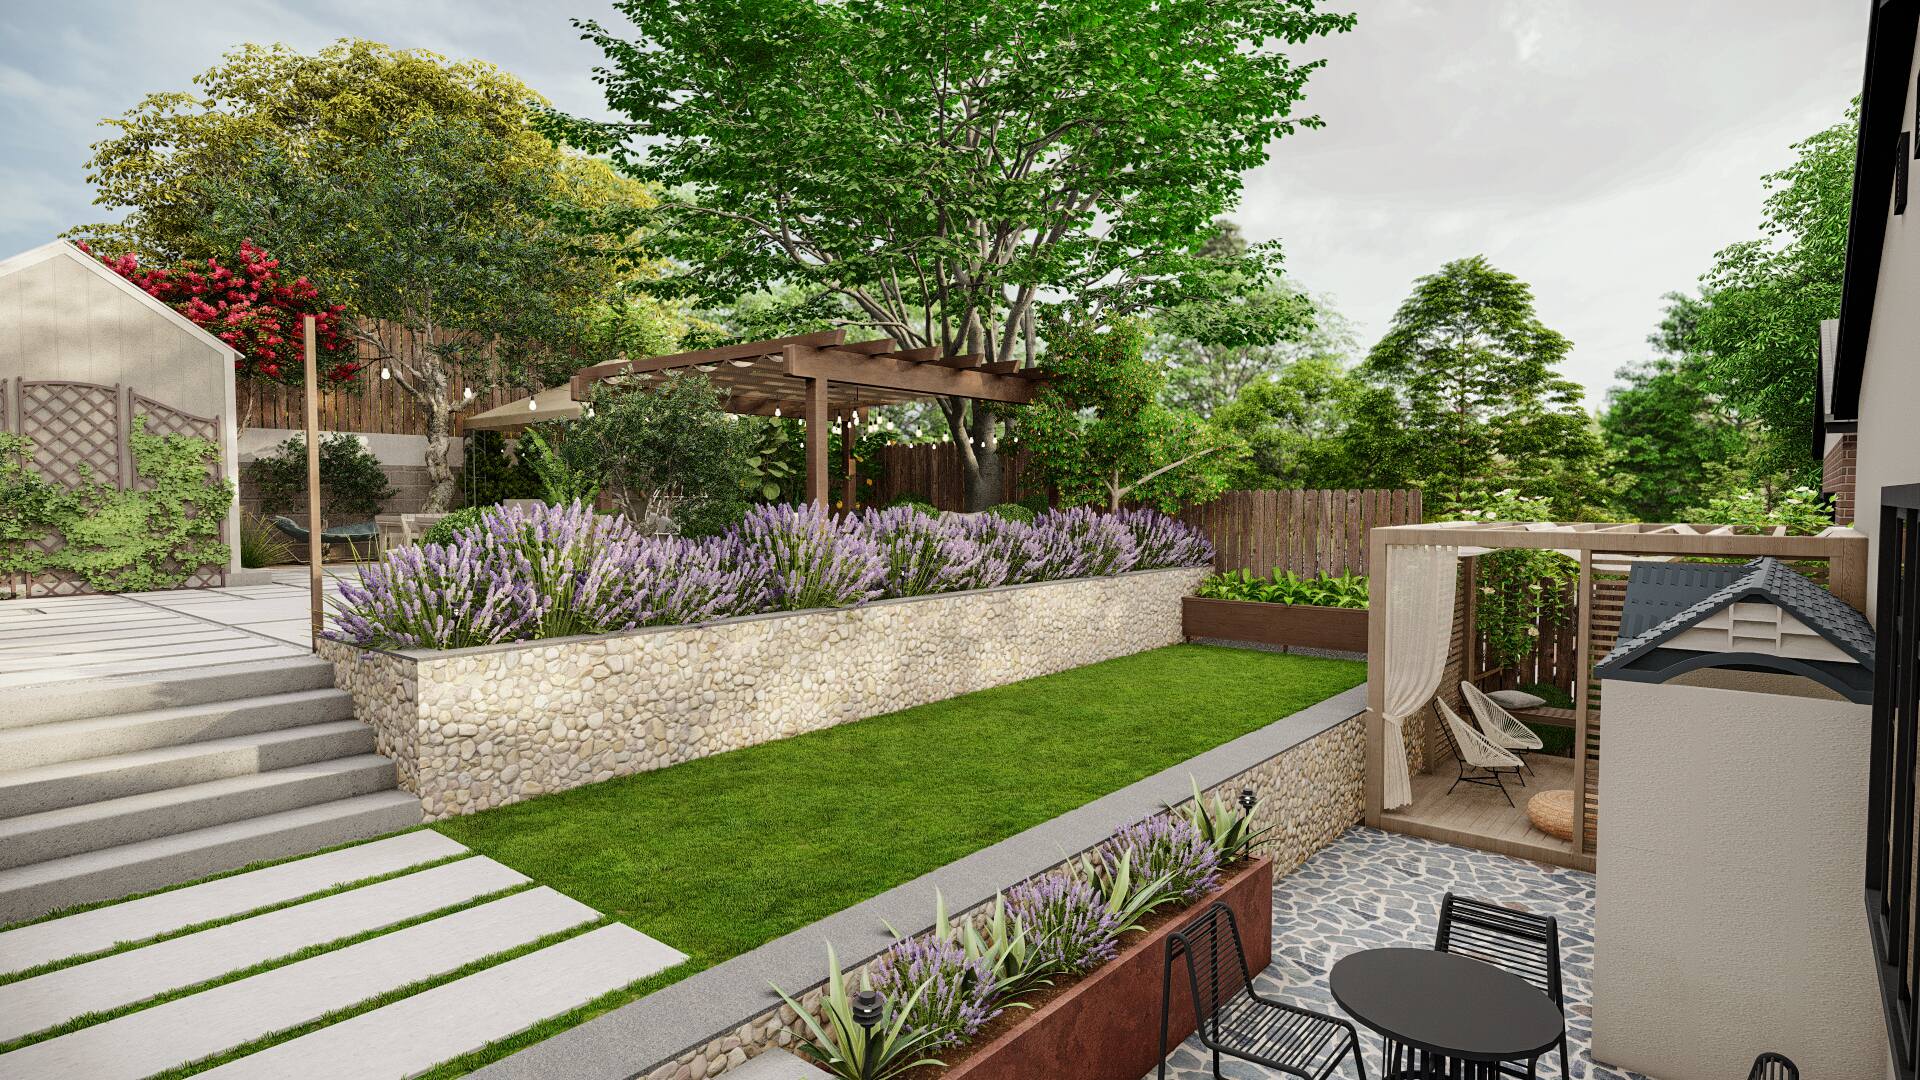 Elegant backyard garden with raised lavender beds, stone retaining walls, wooden pergola, and a cozy seating area